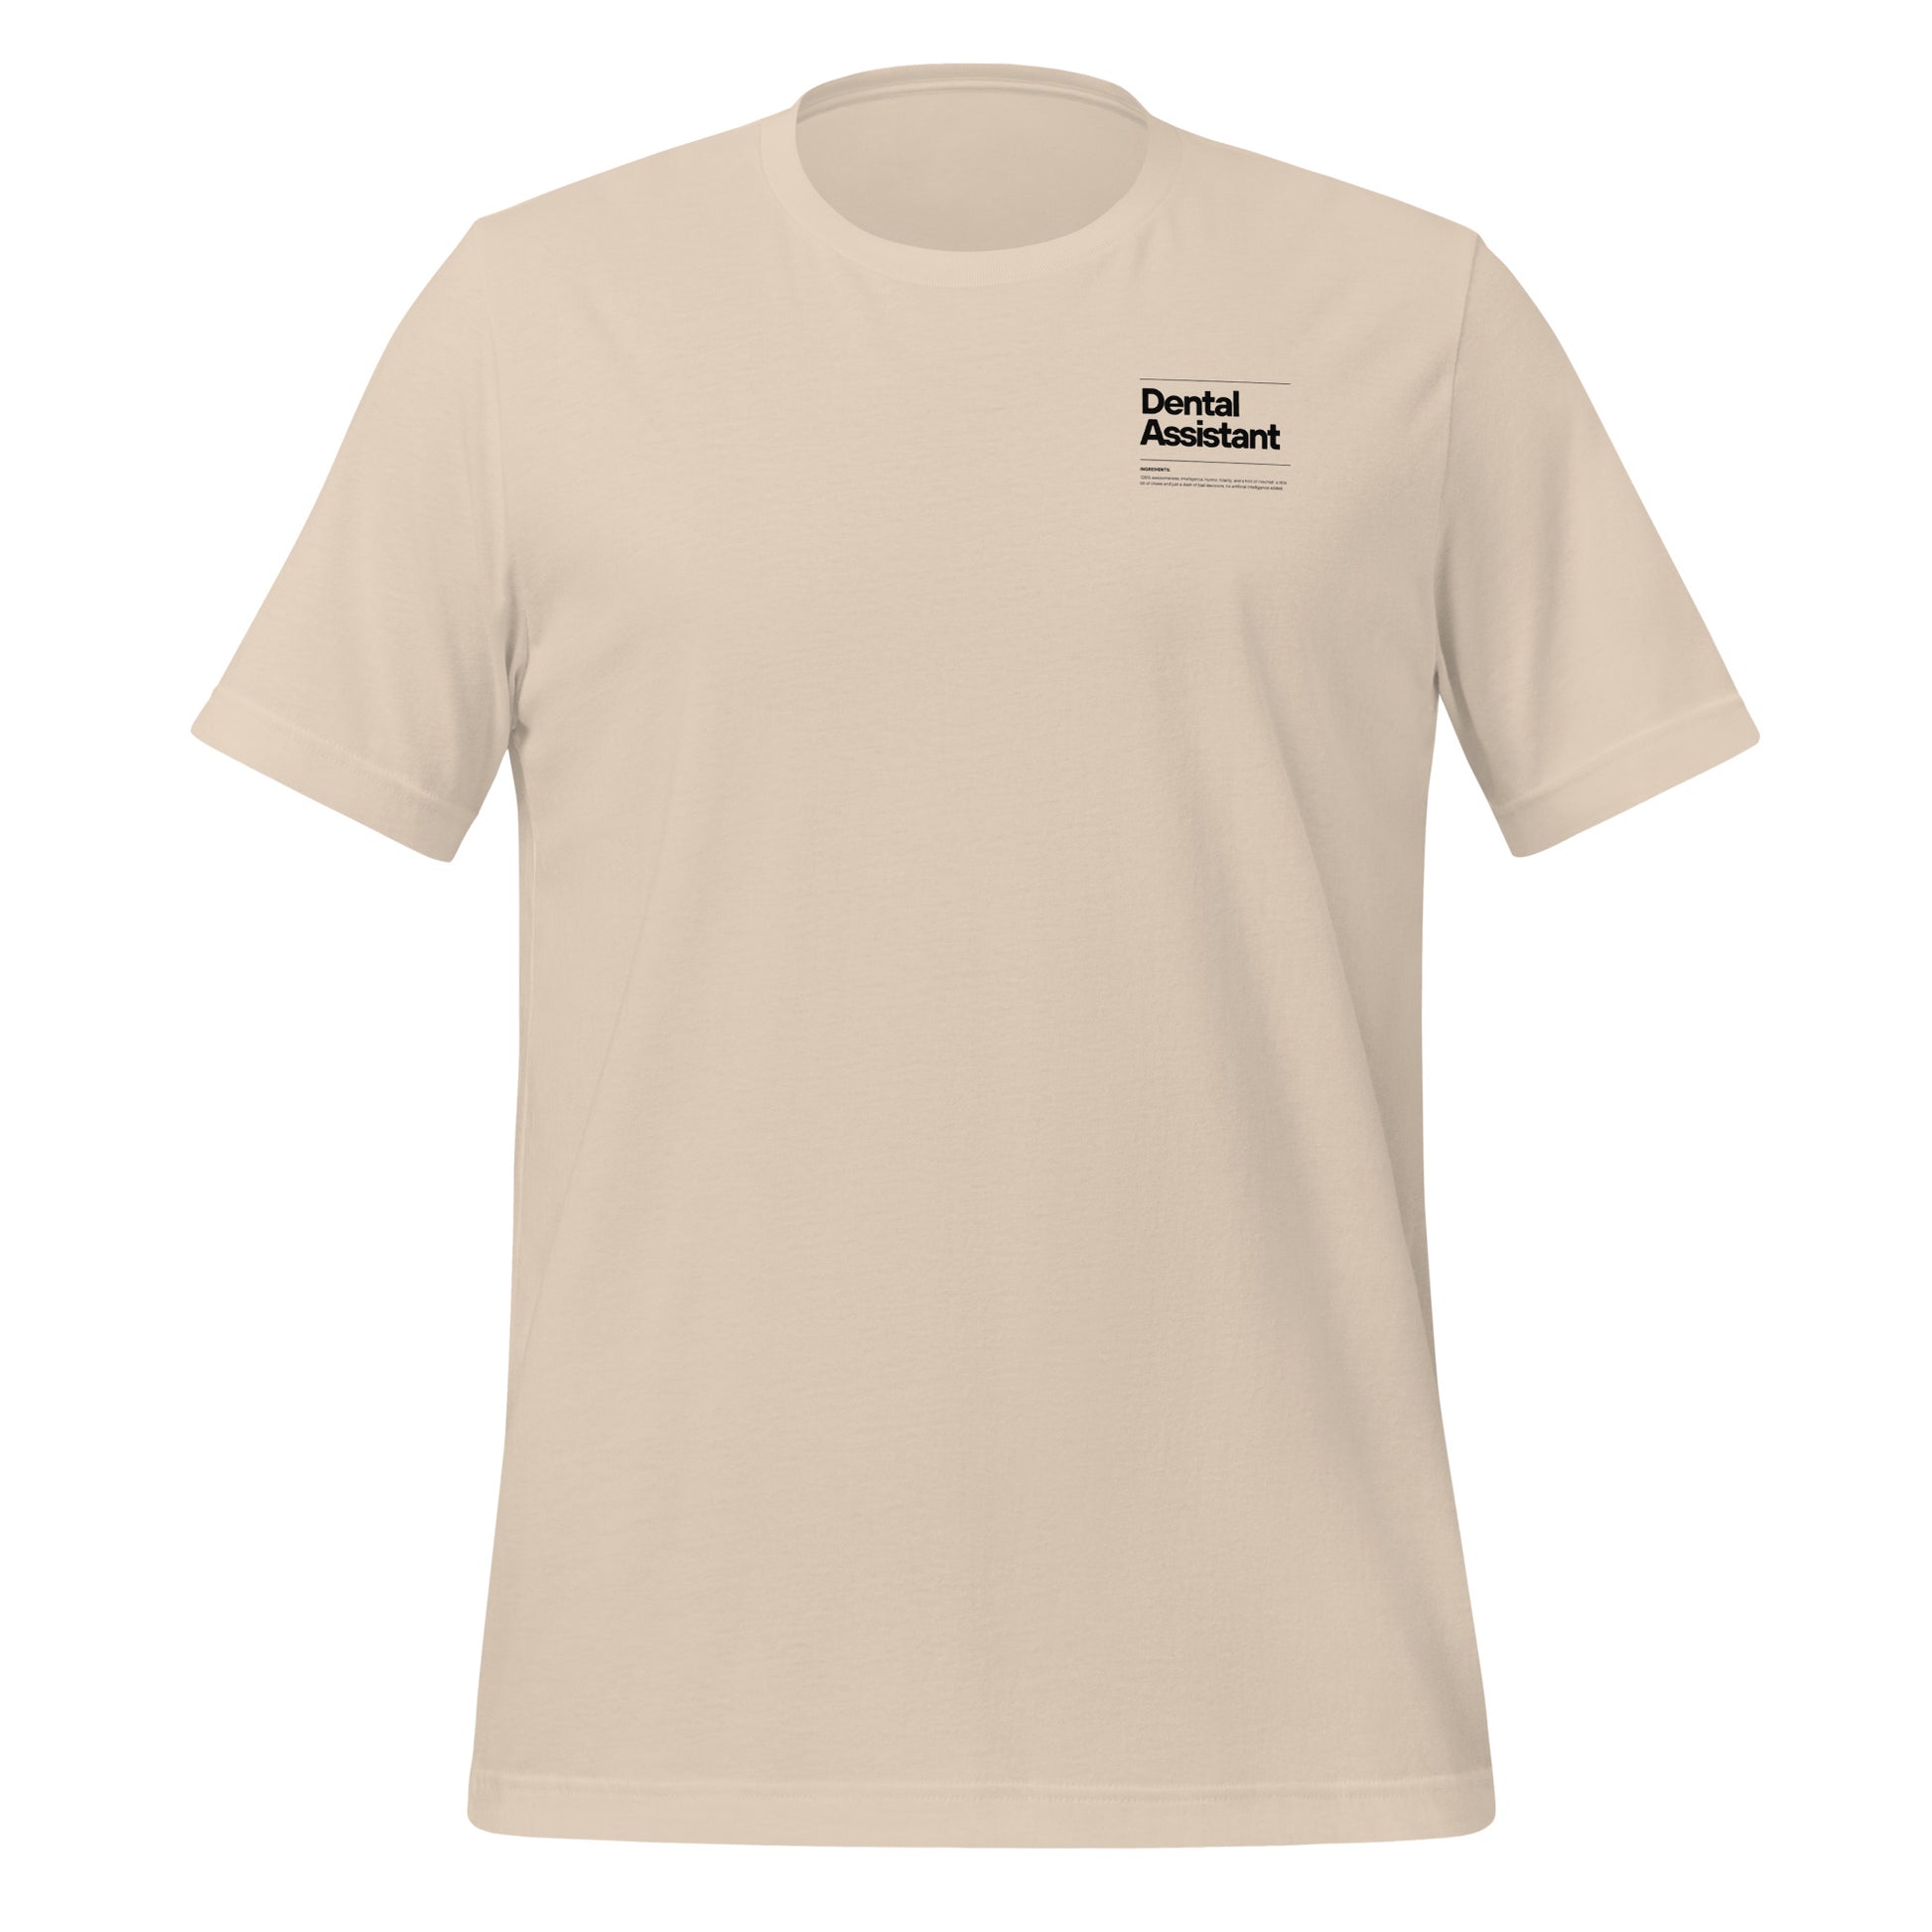 Soft cream dental assistant shirt featuring a creative label design with icons and text, perfect for dental assistants who want to express their identity and passion for their job - dental shirts front view.